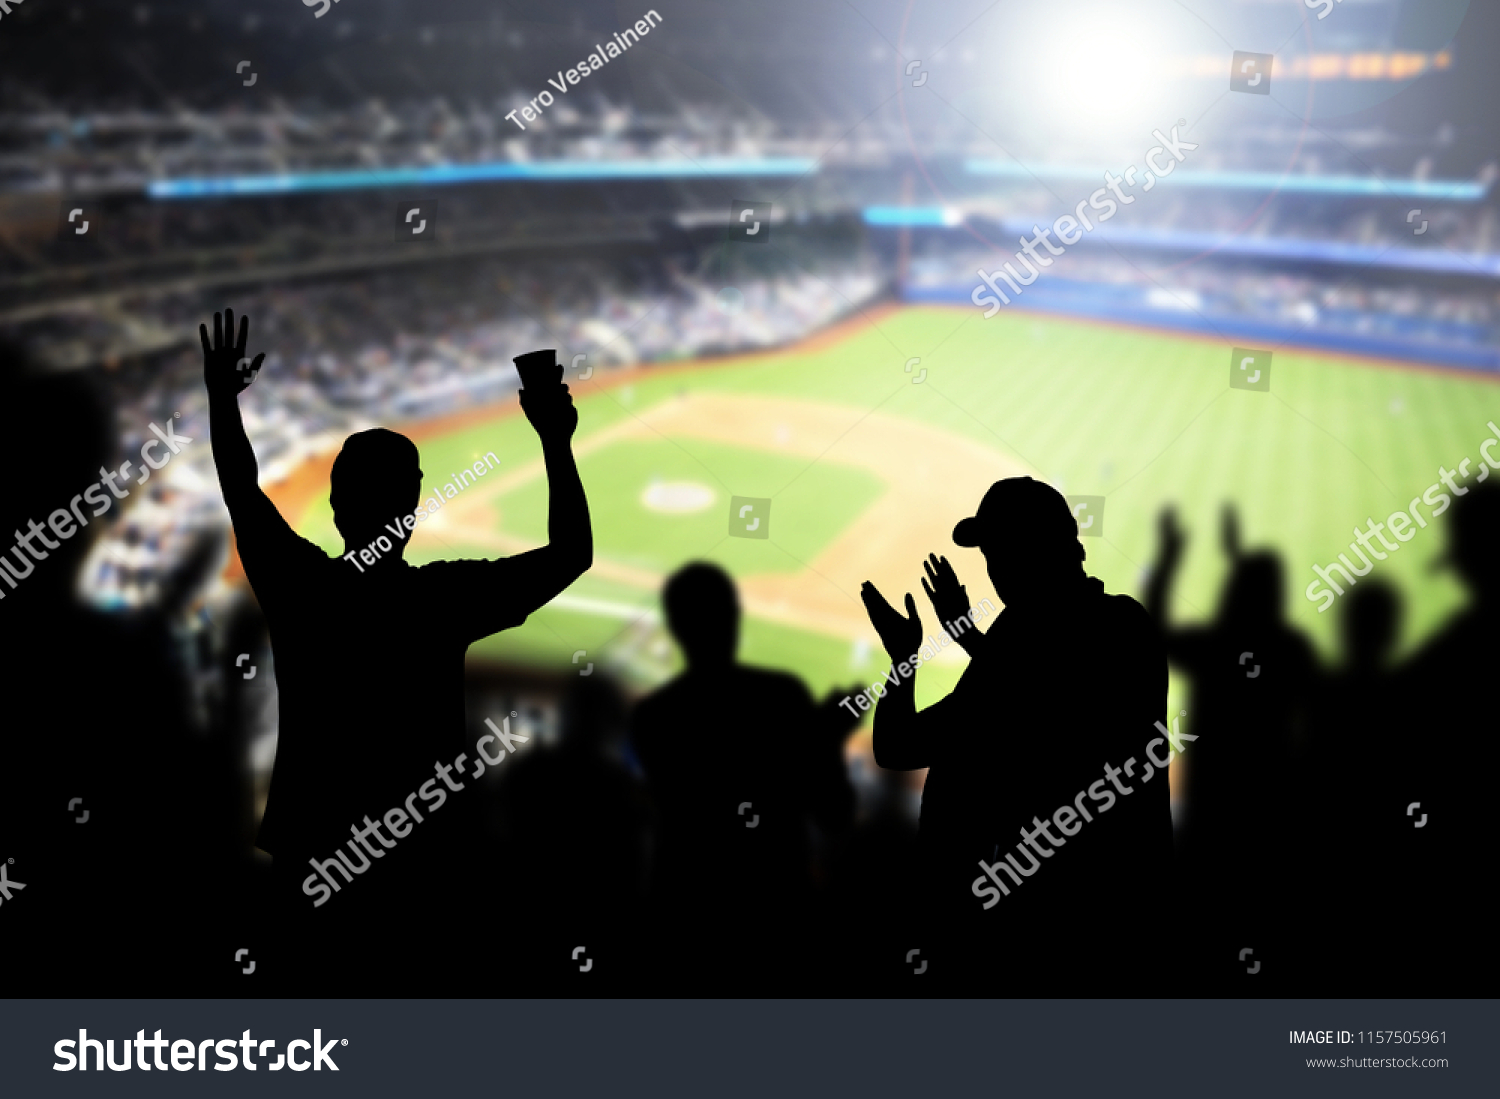 Baseball fans and crowd cheering in stadium and watching the game in ballpark. Happy people enjoying a match and sport event in arena. Friends watching ballgame live. #1157505961